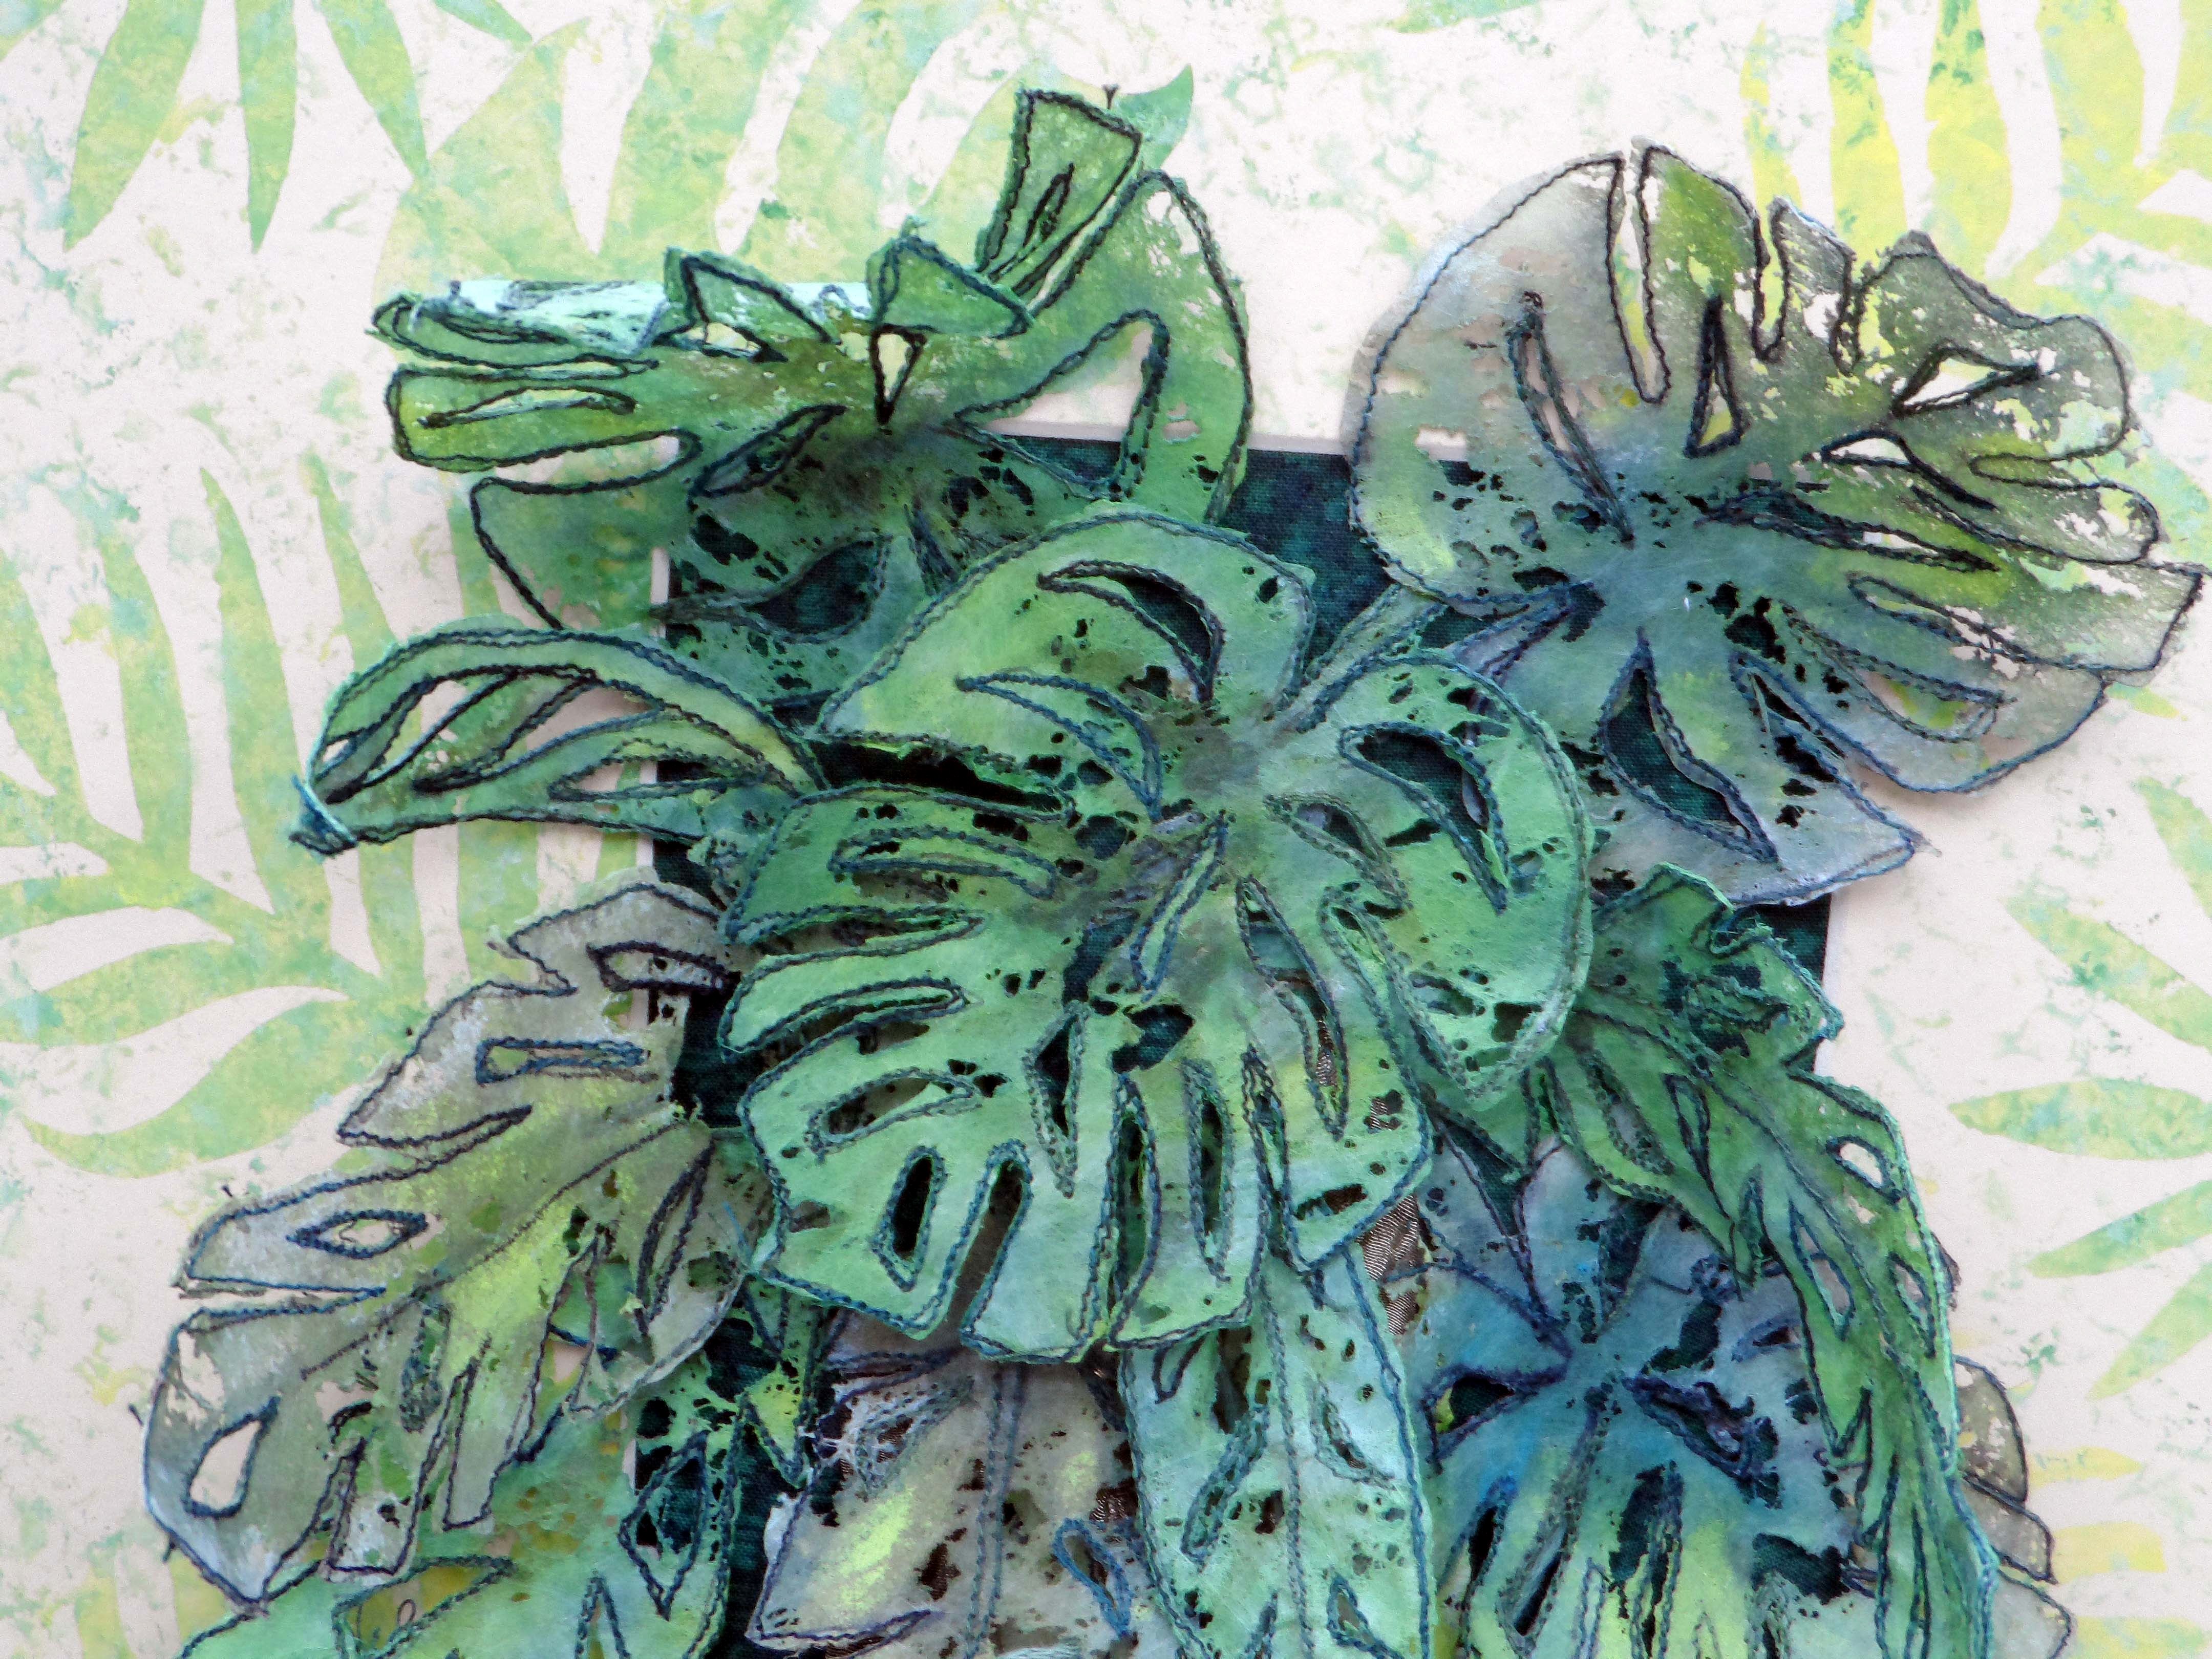 (detail) PROFUSION OF LEAVES by Diane Moore, dyed, painted and distressed Lutrador with machine stitch, Contemporary Threads exhibition, Sefton Palm House, Feb 2022